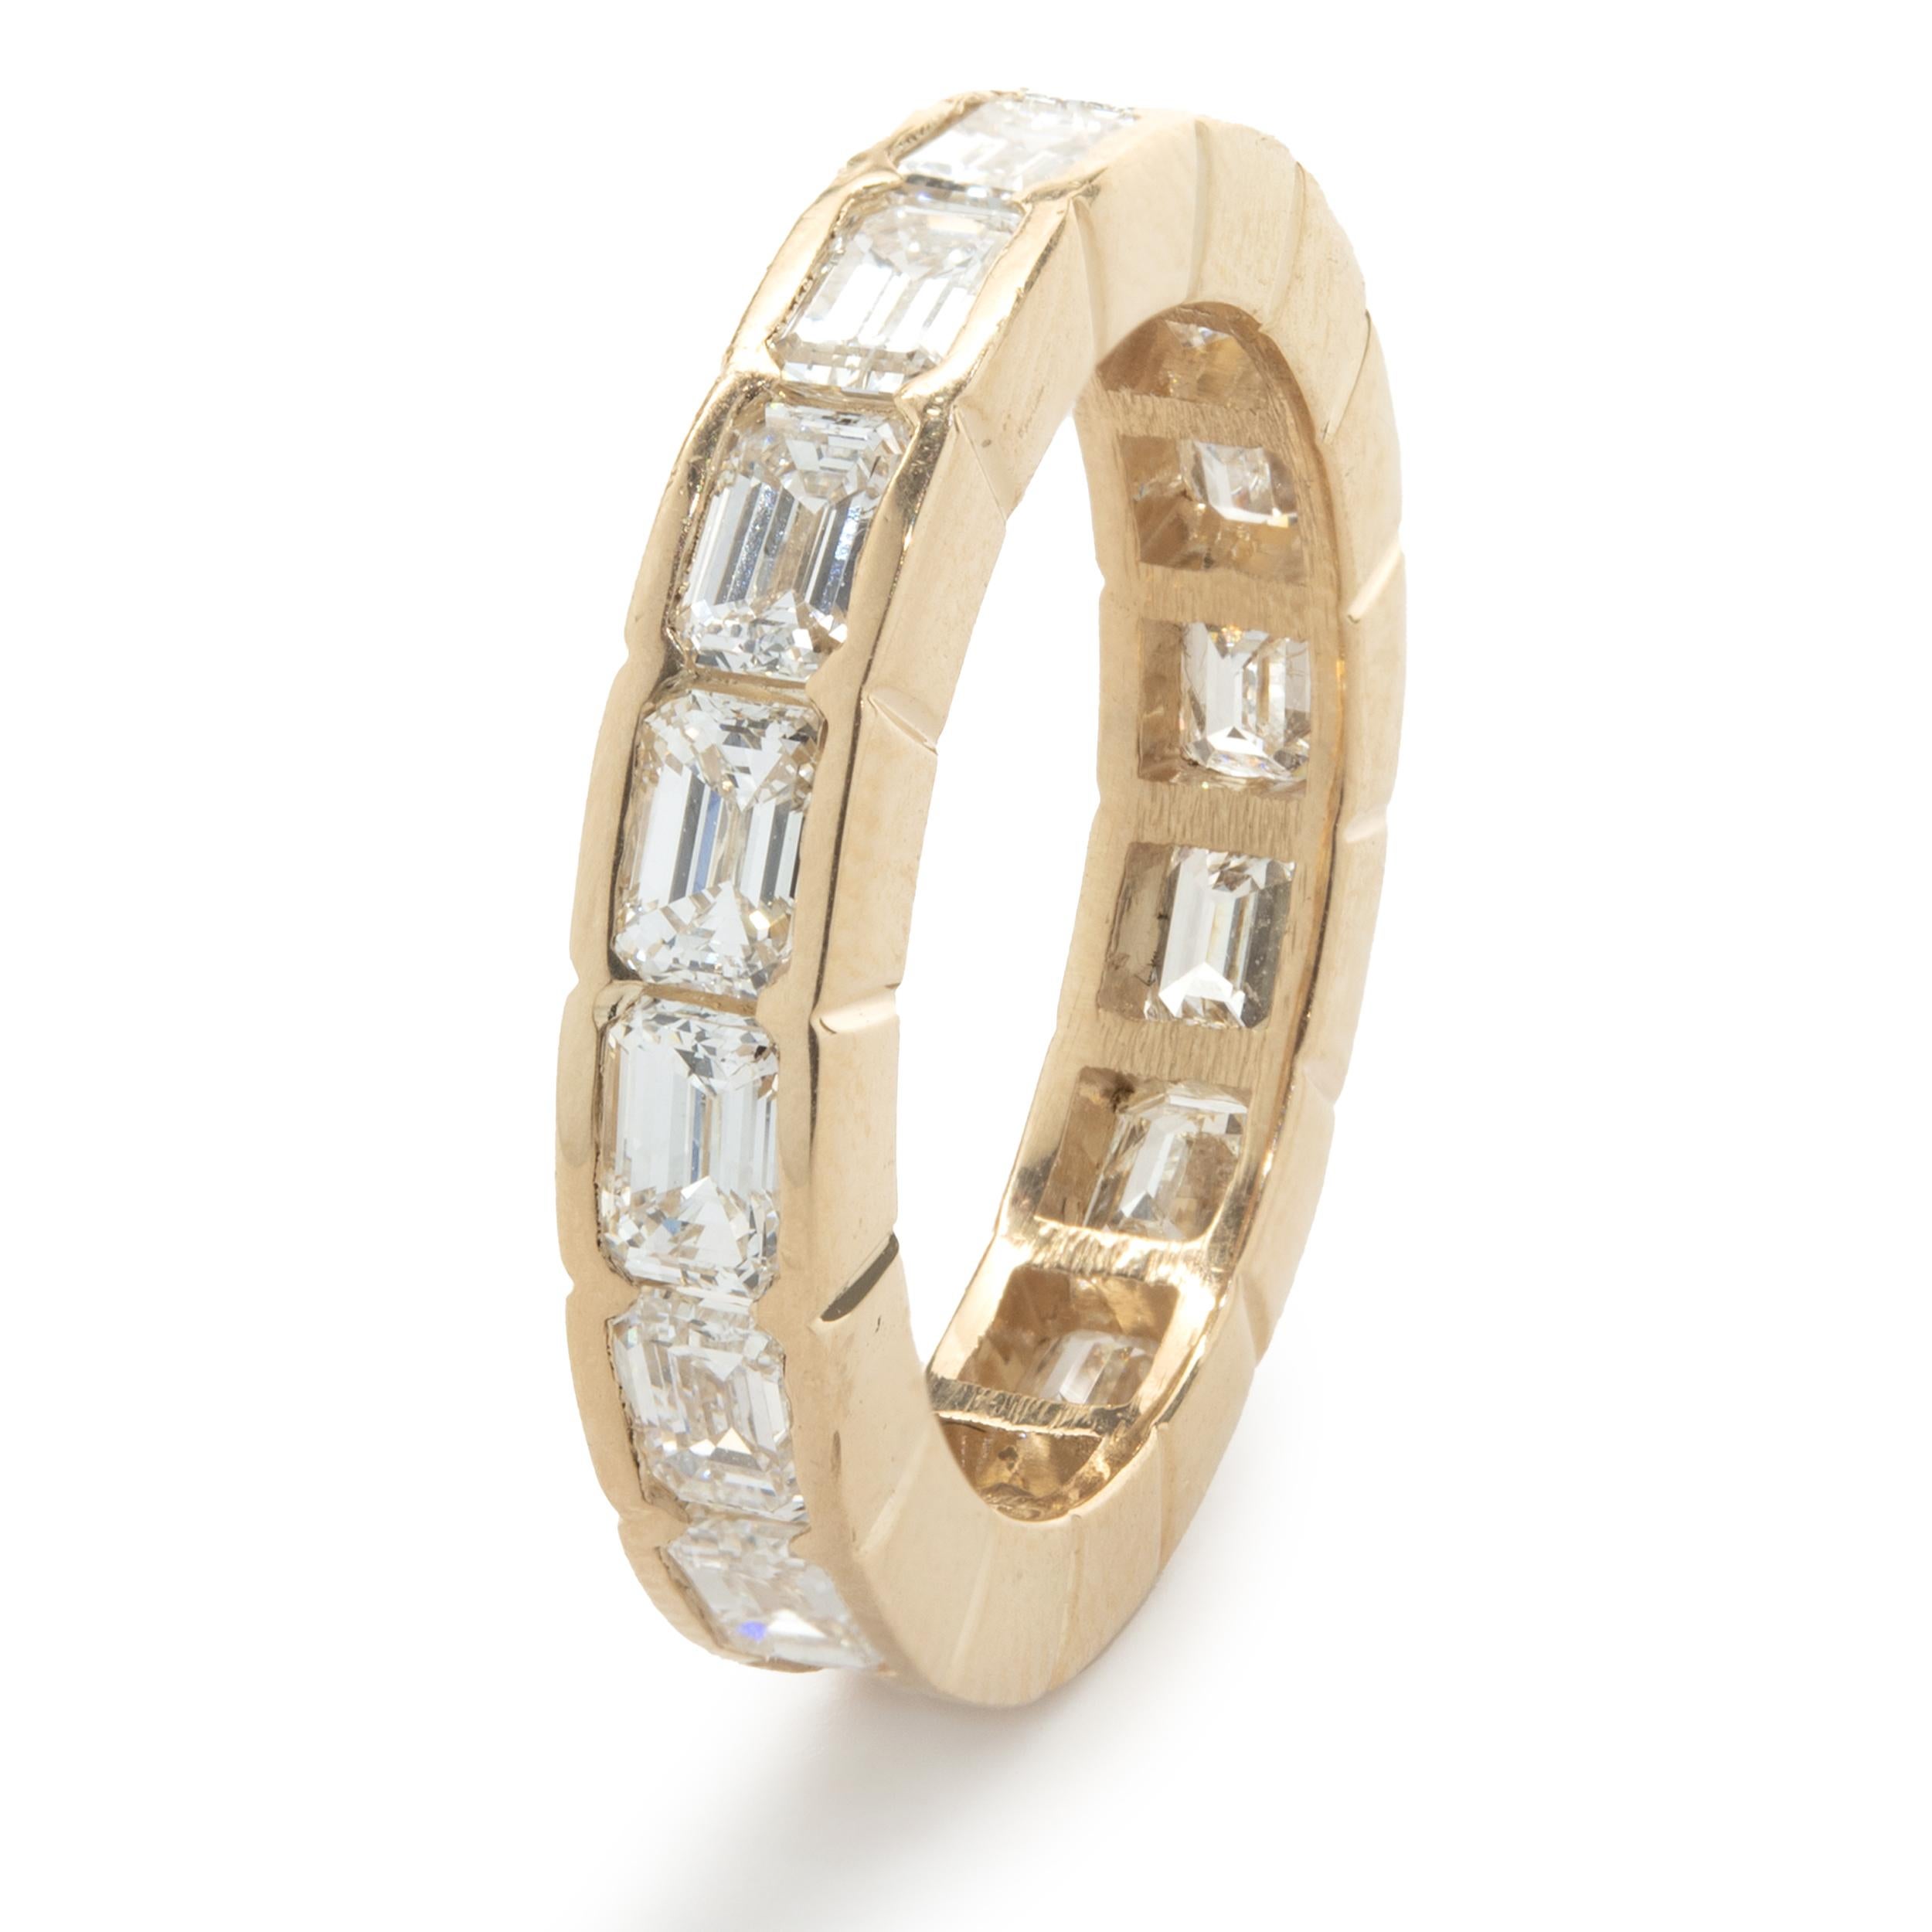 14 Karat Yellow Gold Diamond Band In Excellent Condition For Sale In Scottsdale, AZ